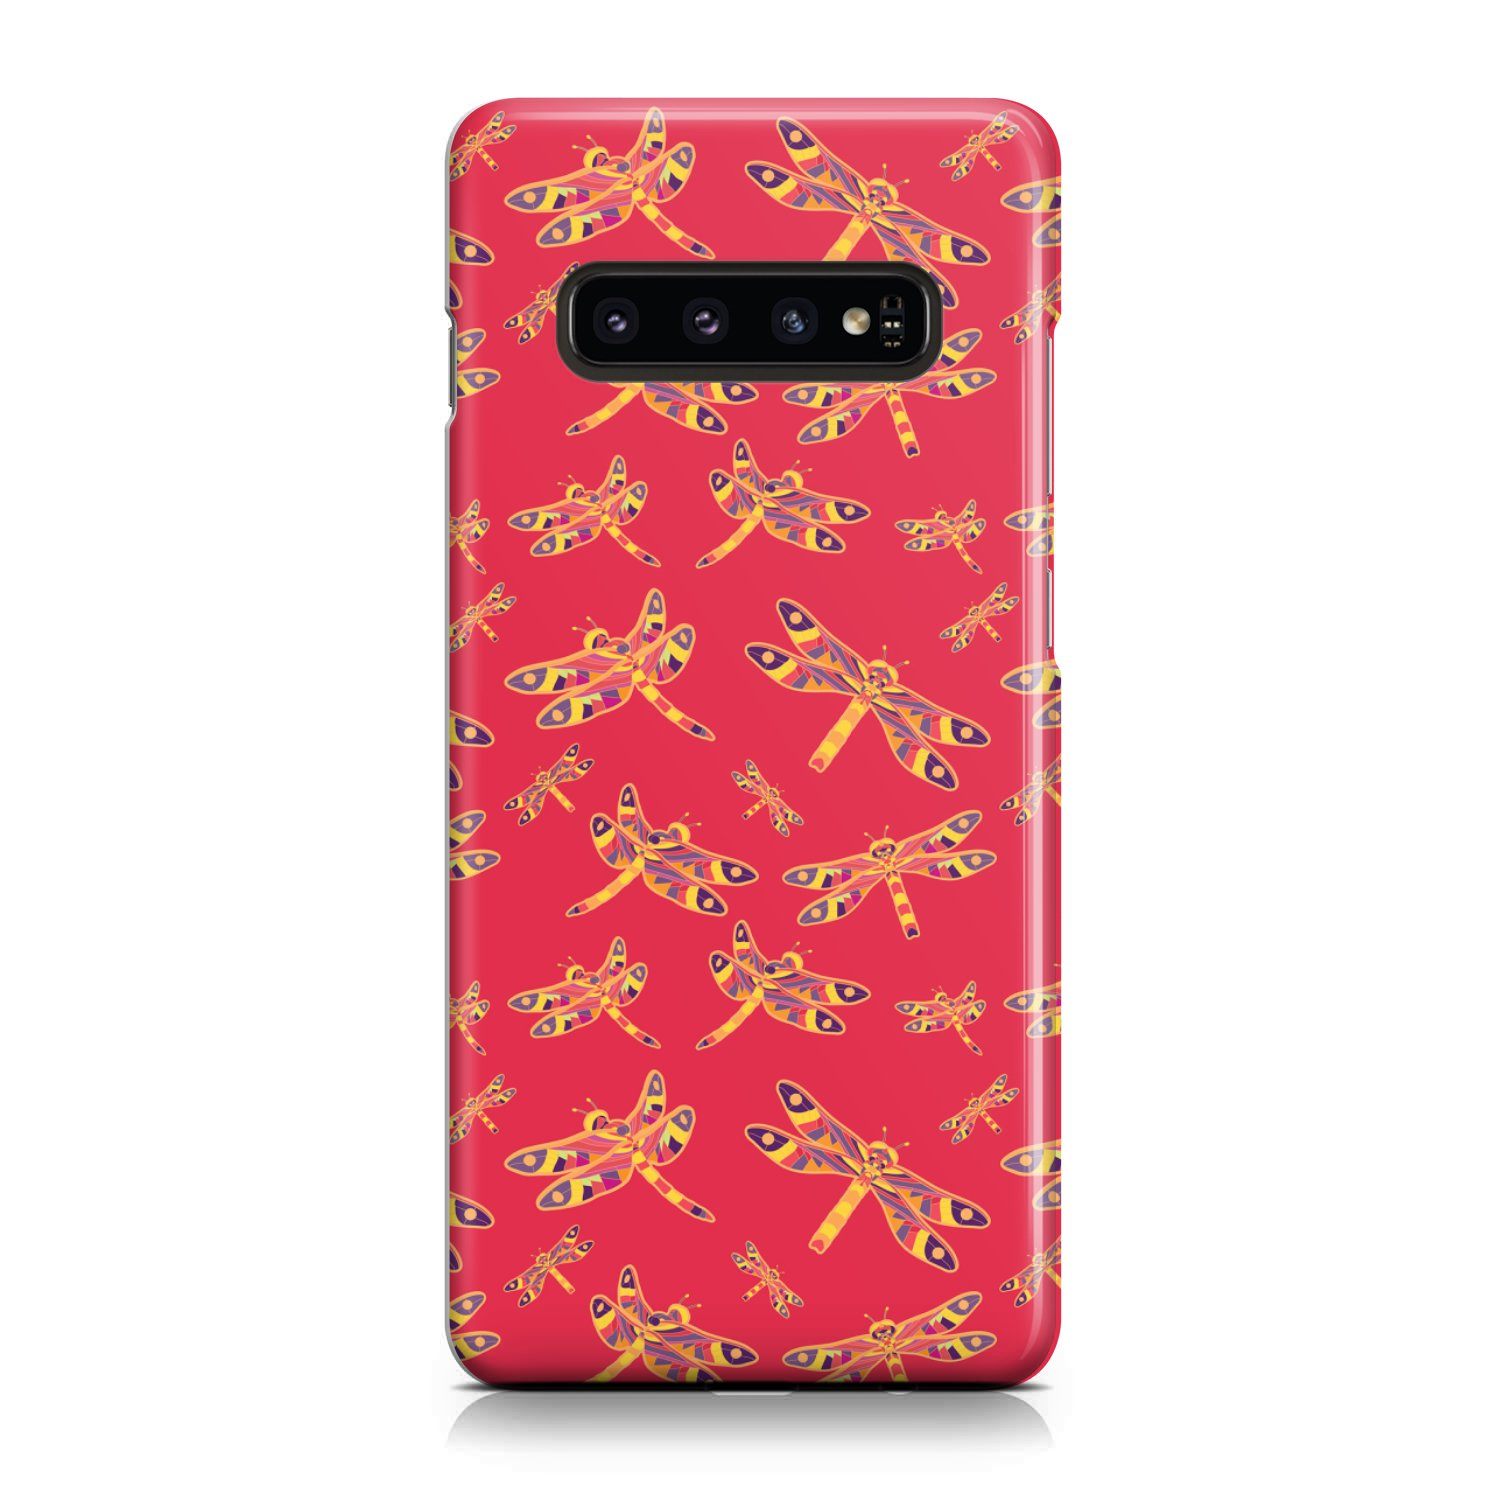 Gathering Rouge Phone Case Phone Case wc-fulfillment Samsung Galaxy S10 Plus 